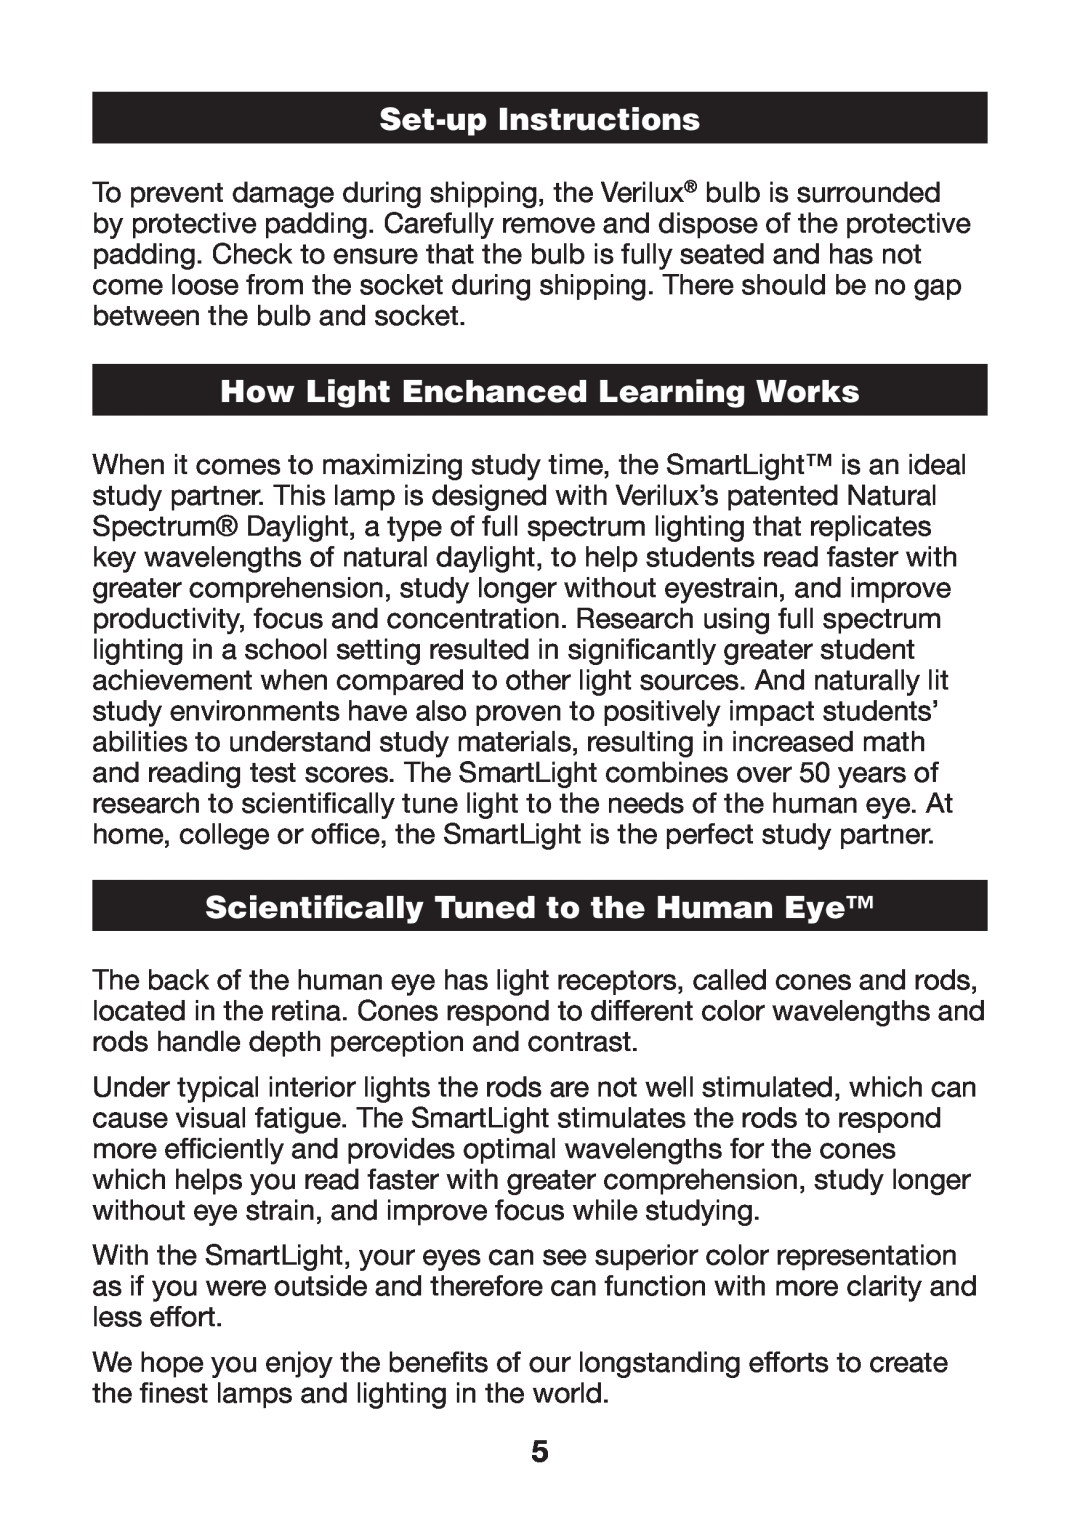 Verilux VD12 manual Set-upInstructions, How Light Enchanced Learning Works, Scientifically Tuned to the Human Eye 